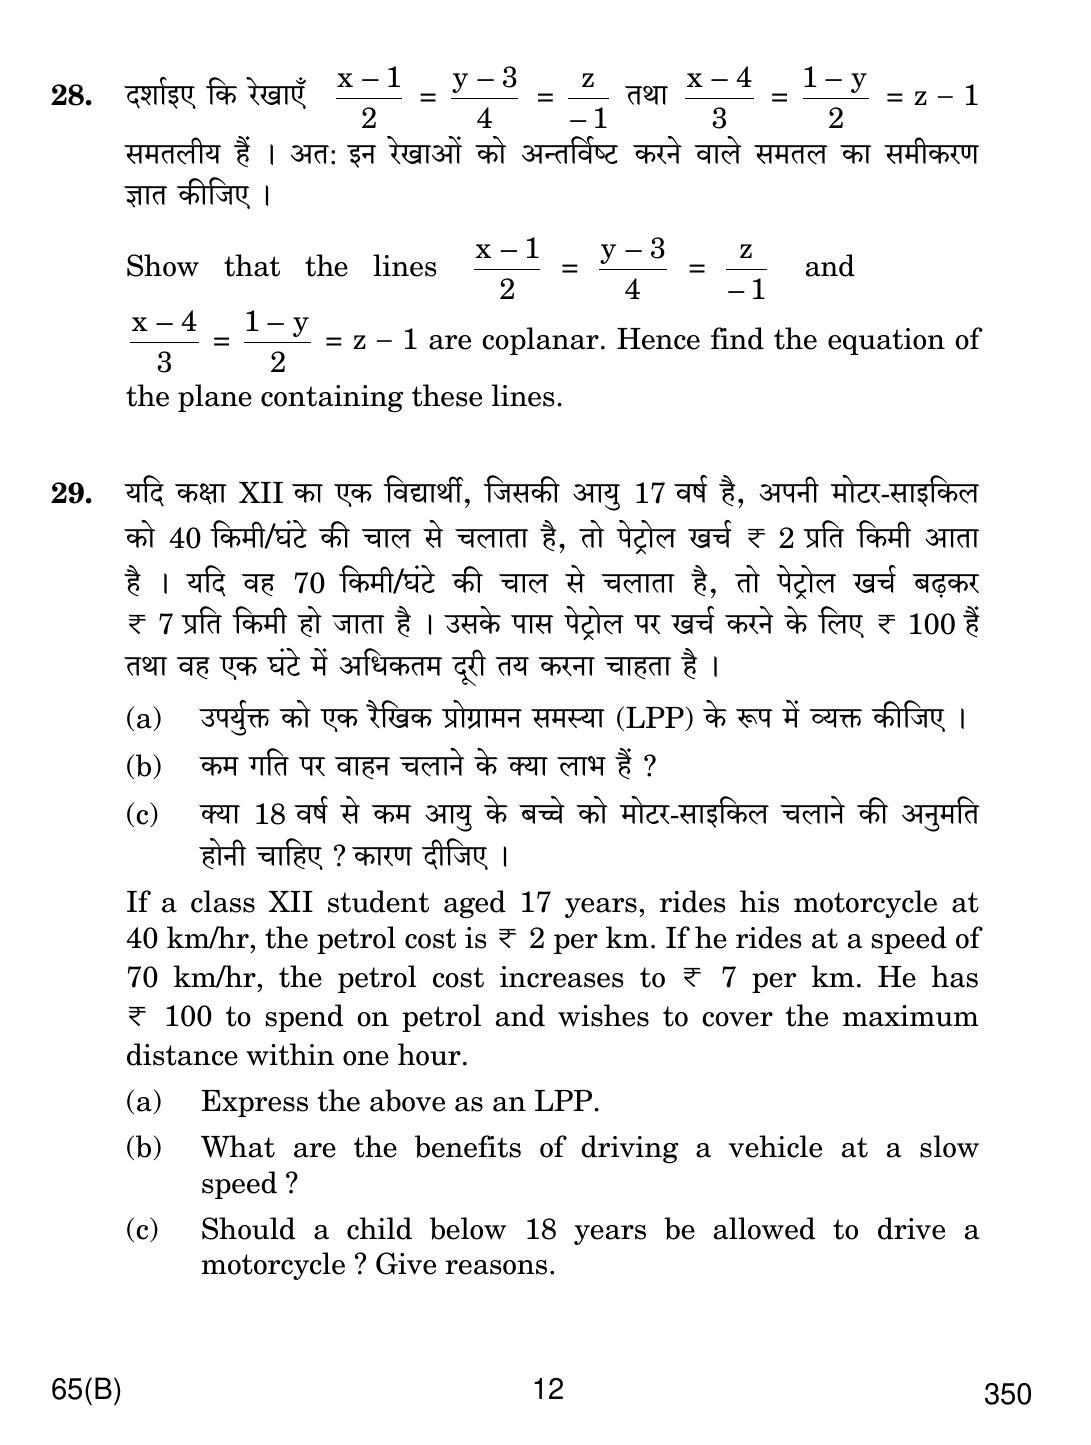 CBSE Class 12 65(B) MATHS FOR BLIND CANDIDATES 2018 Question Paper - Page 12